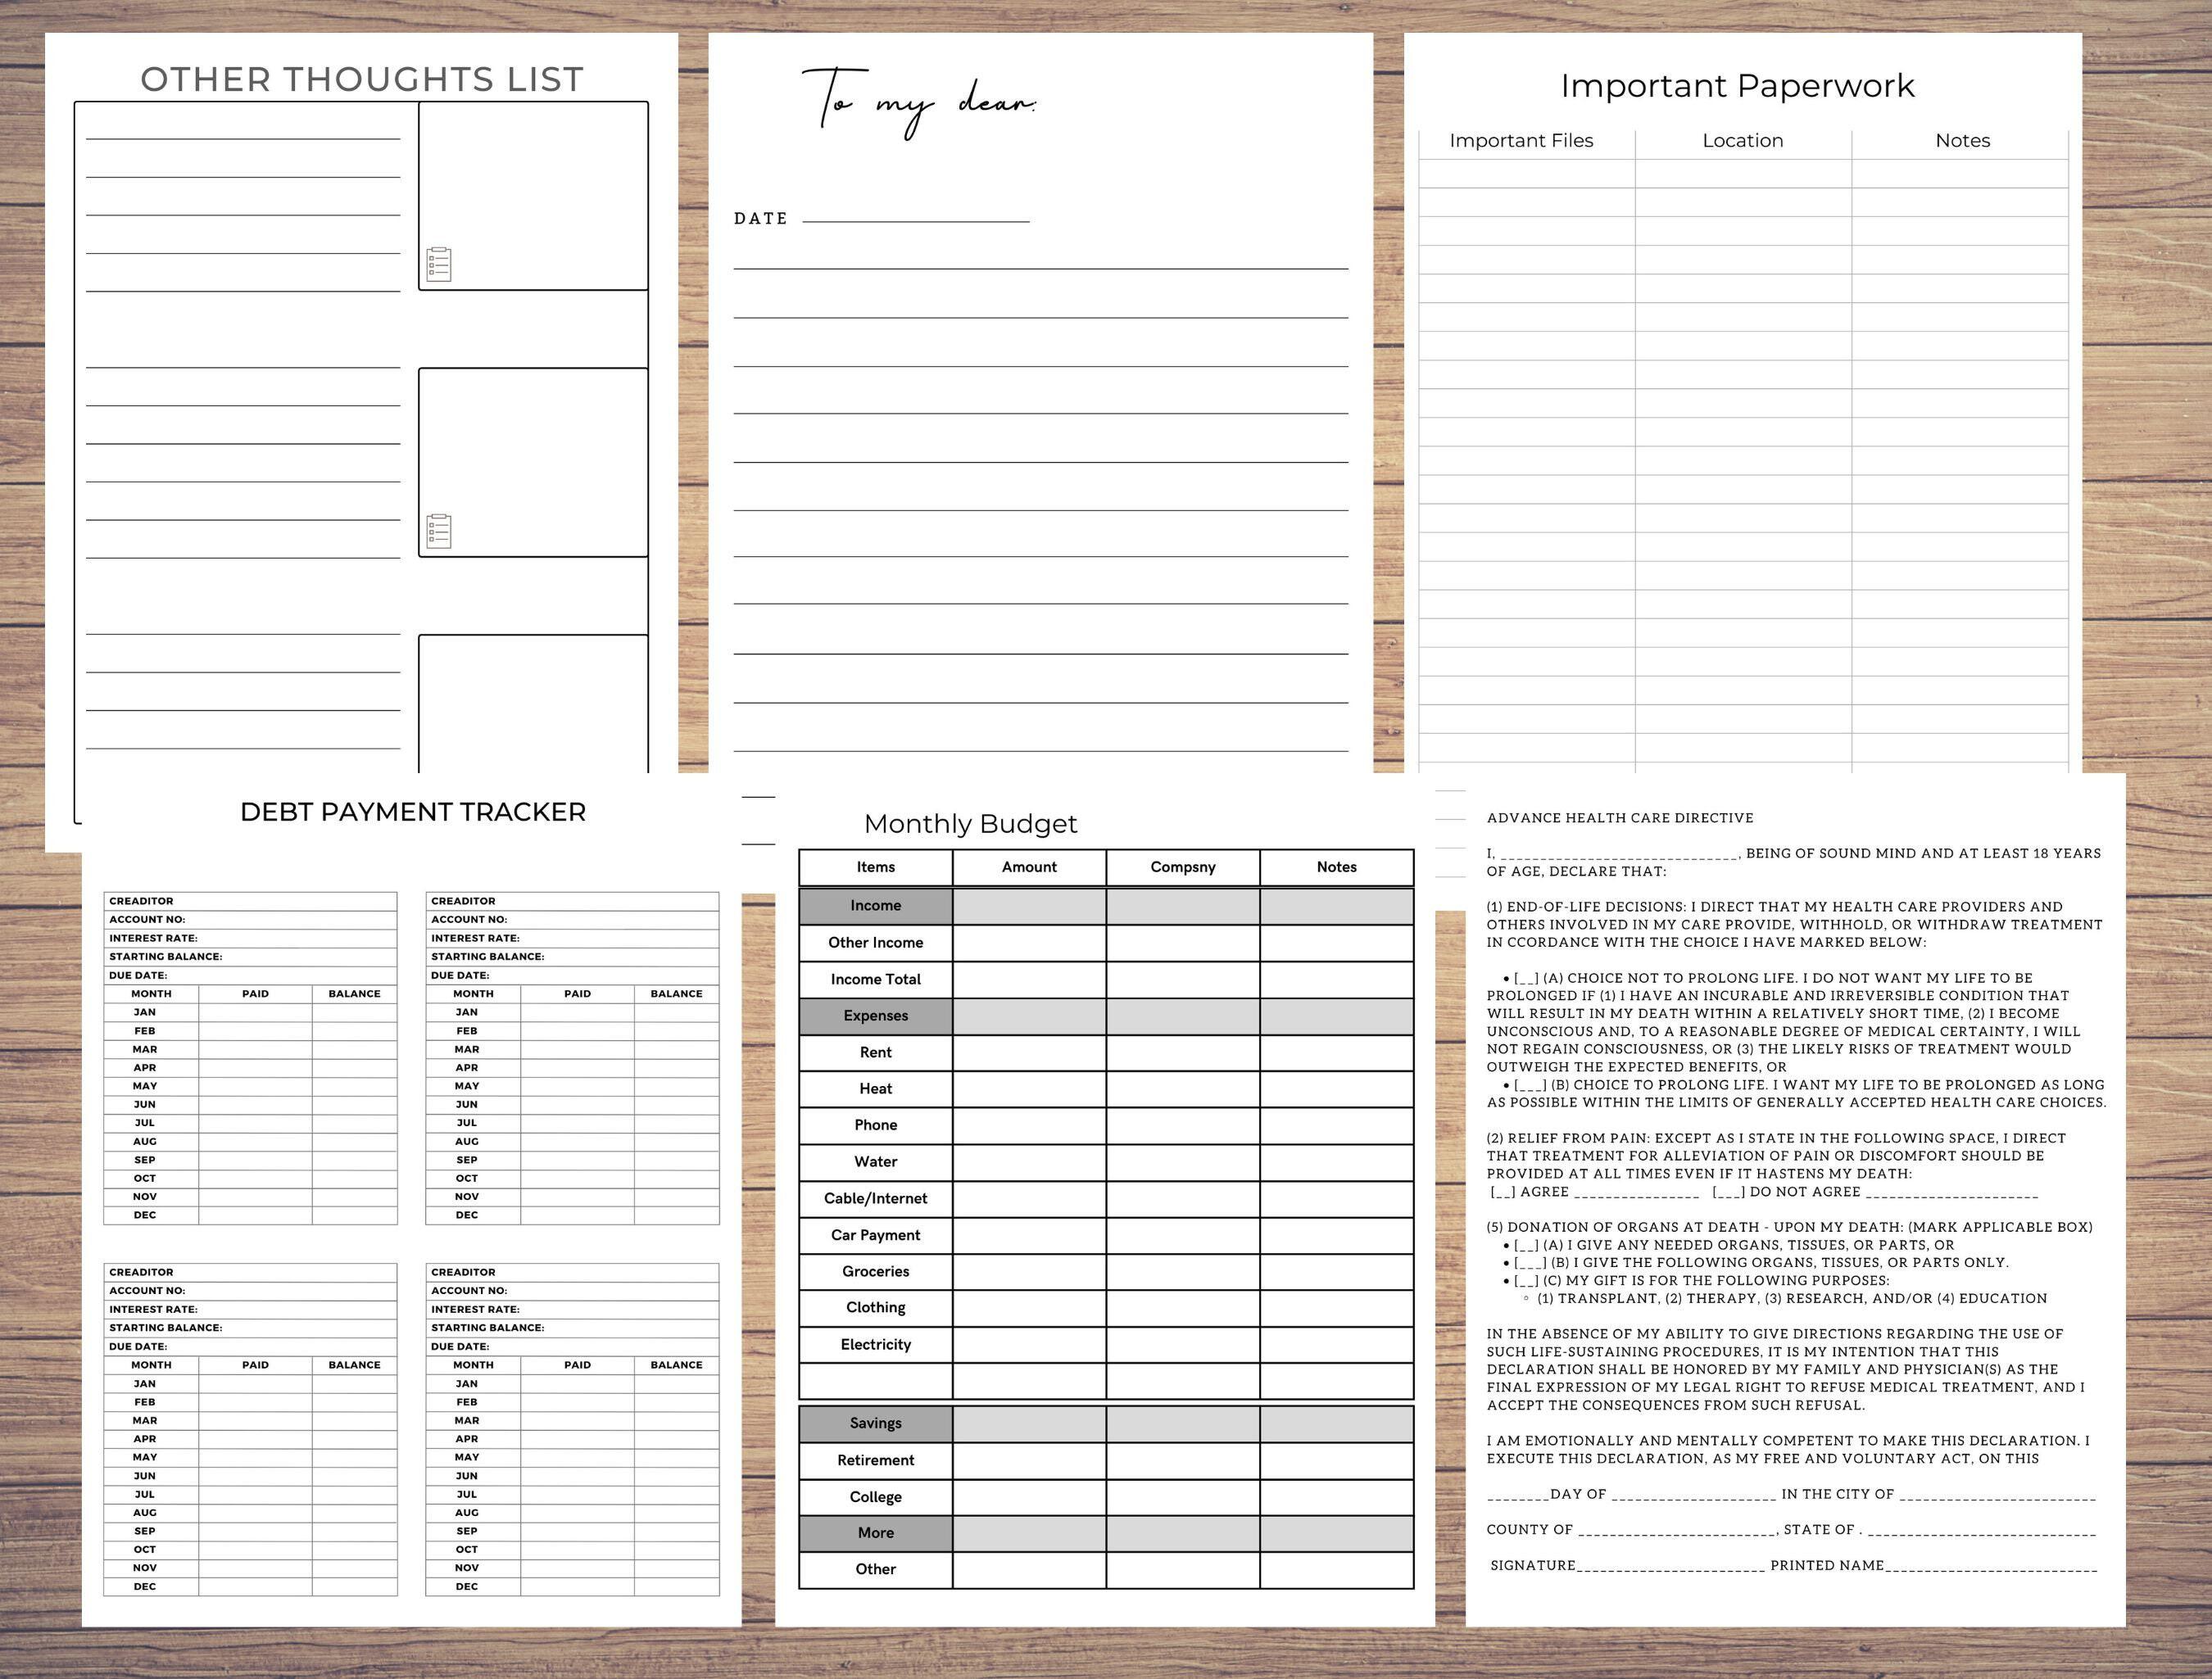 Home & Living :: Office & Organization :: Calendars & Planners :: Printable  End of Life Planner, Final Wishes Plan, Funeral, Death, Beneficiary Info  and Estate Planning, Written Will, When I Die Digital PDF